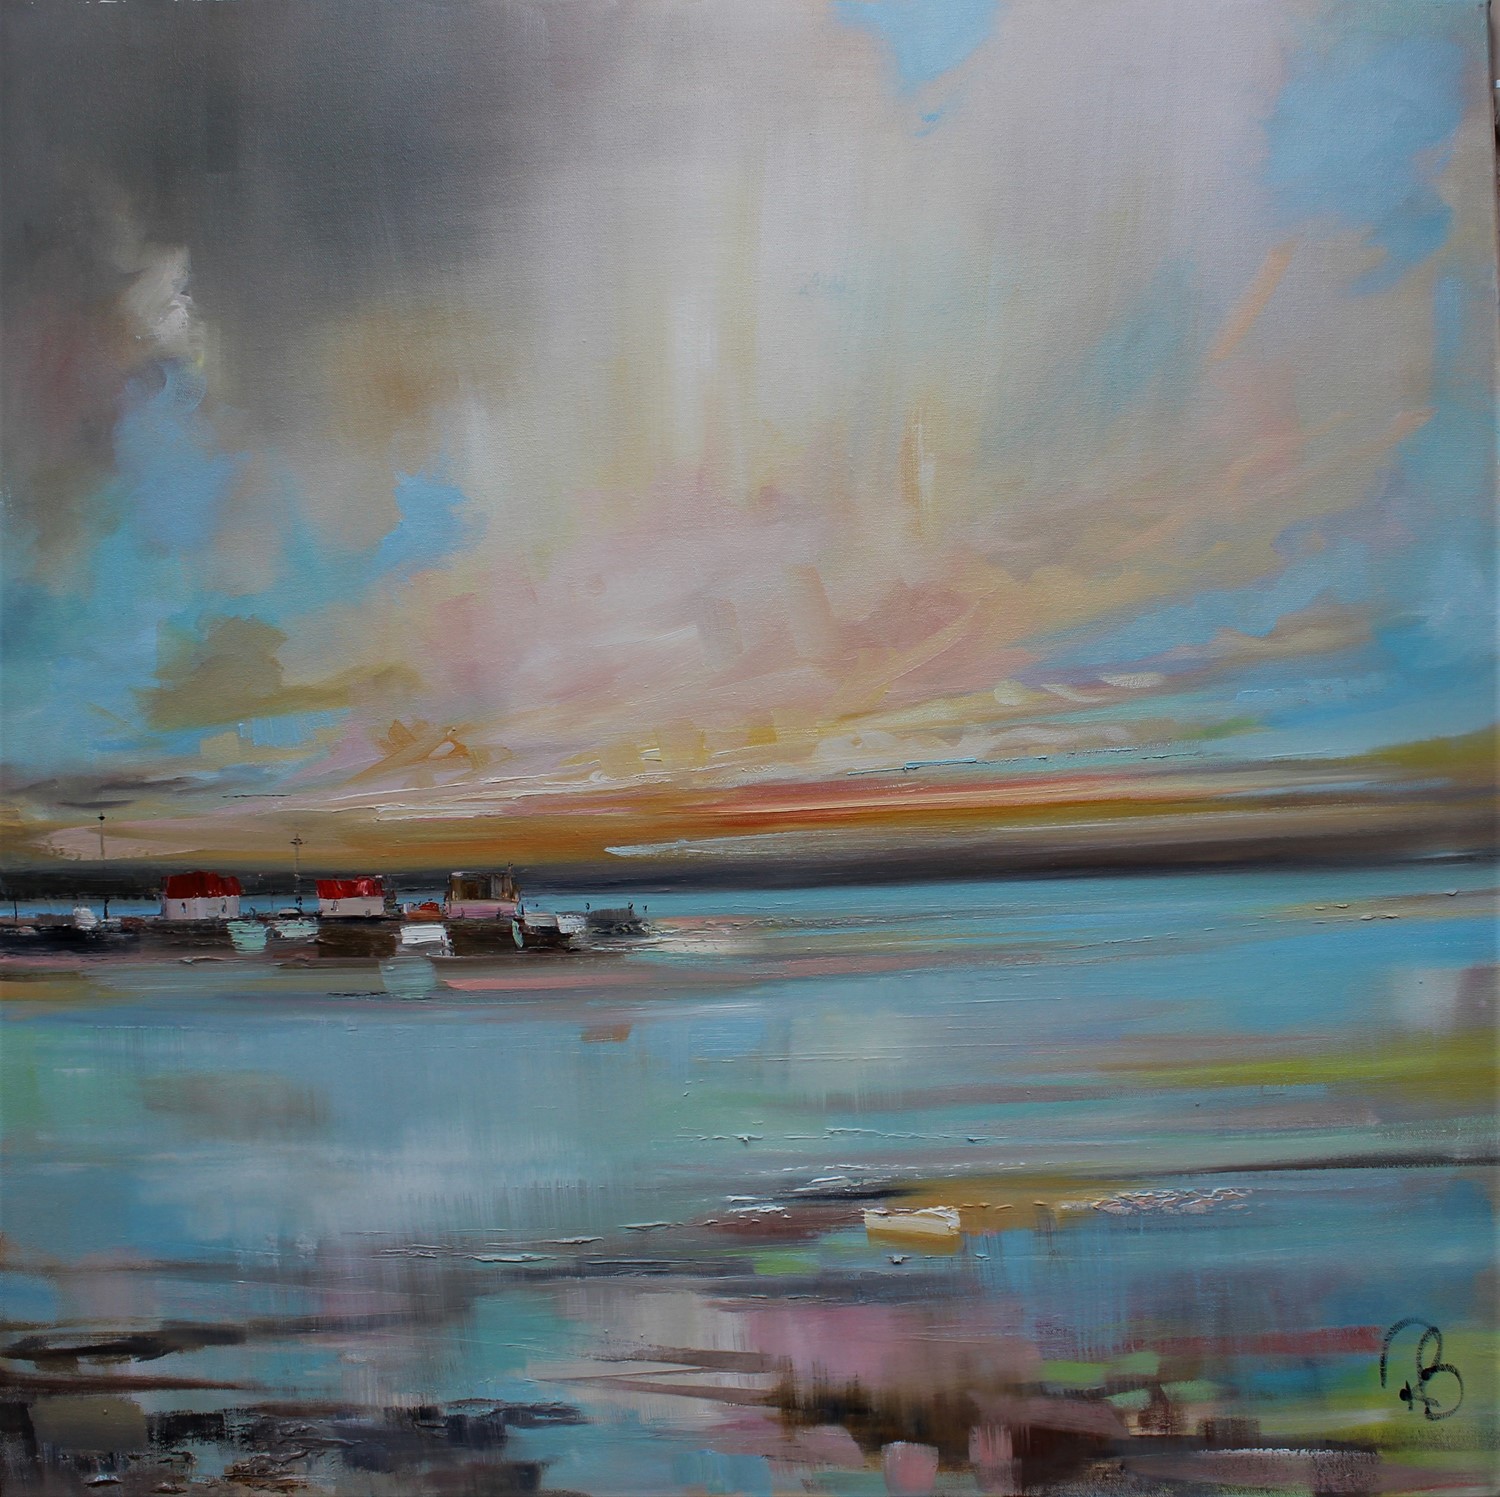 'Ever - Changing Sunset' by artist Rosanne Barr